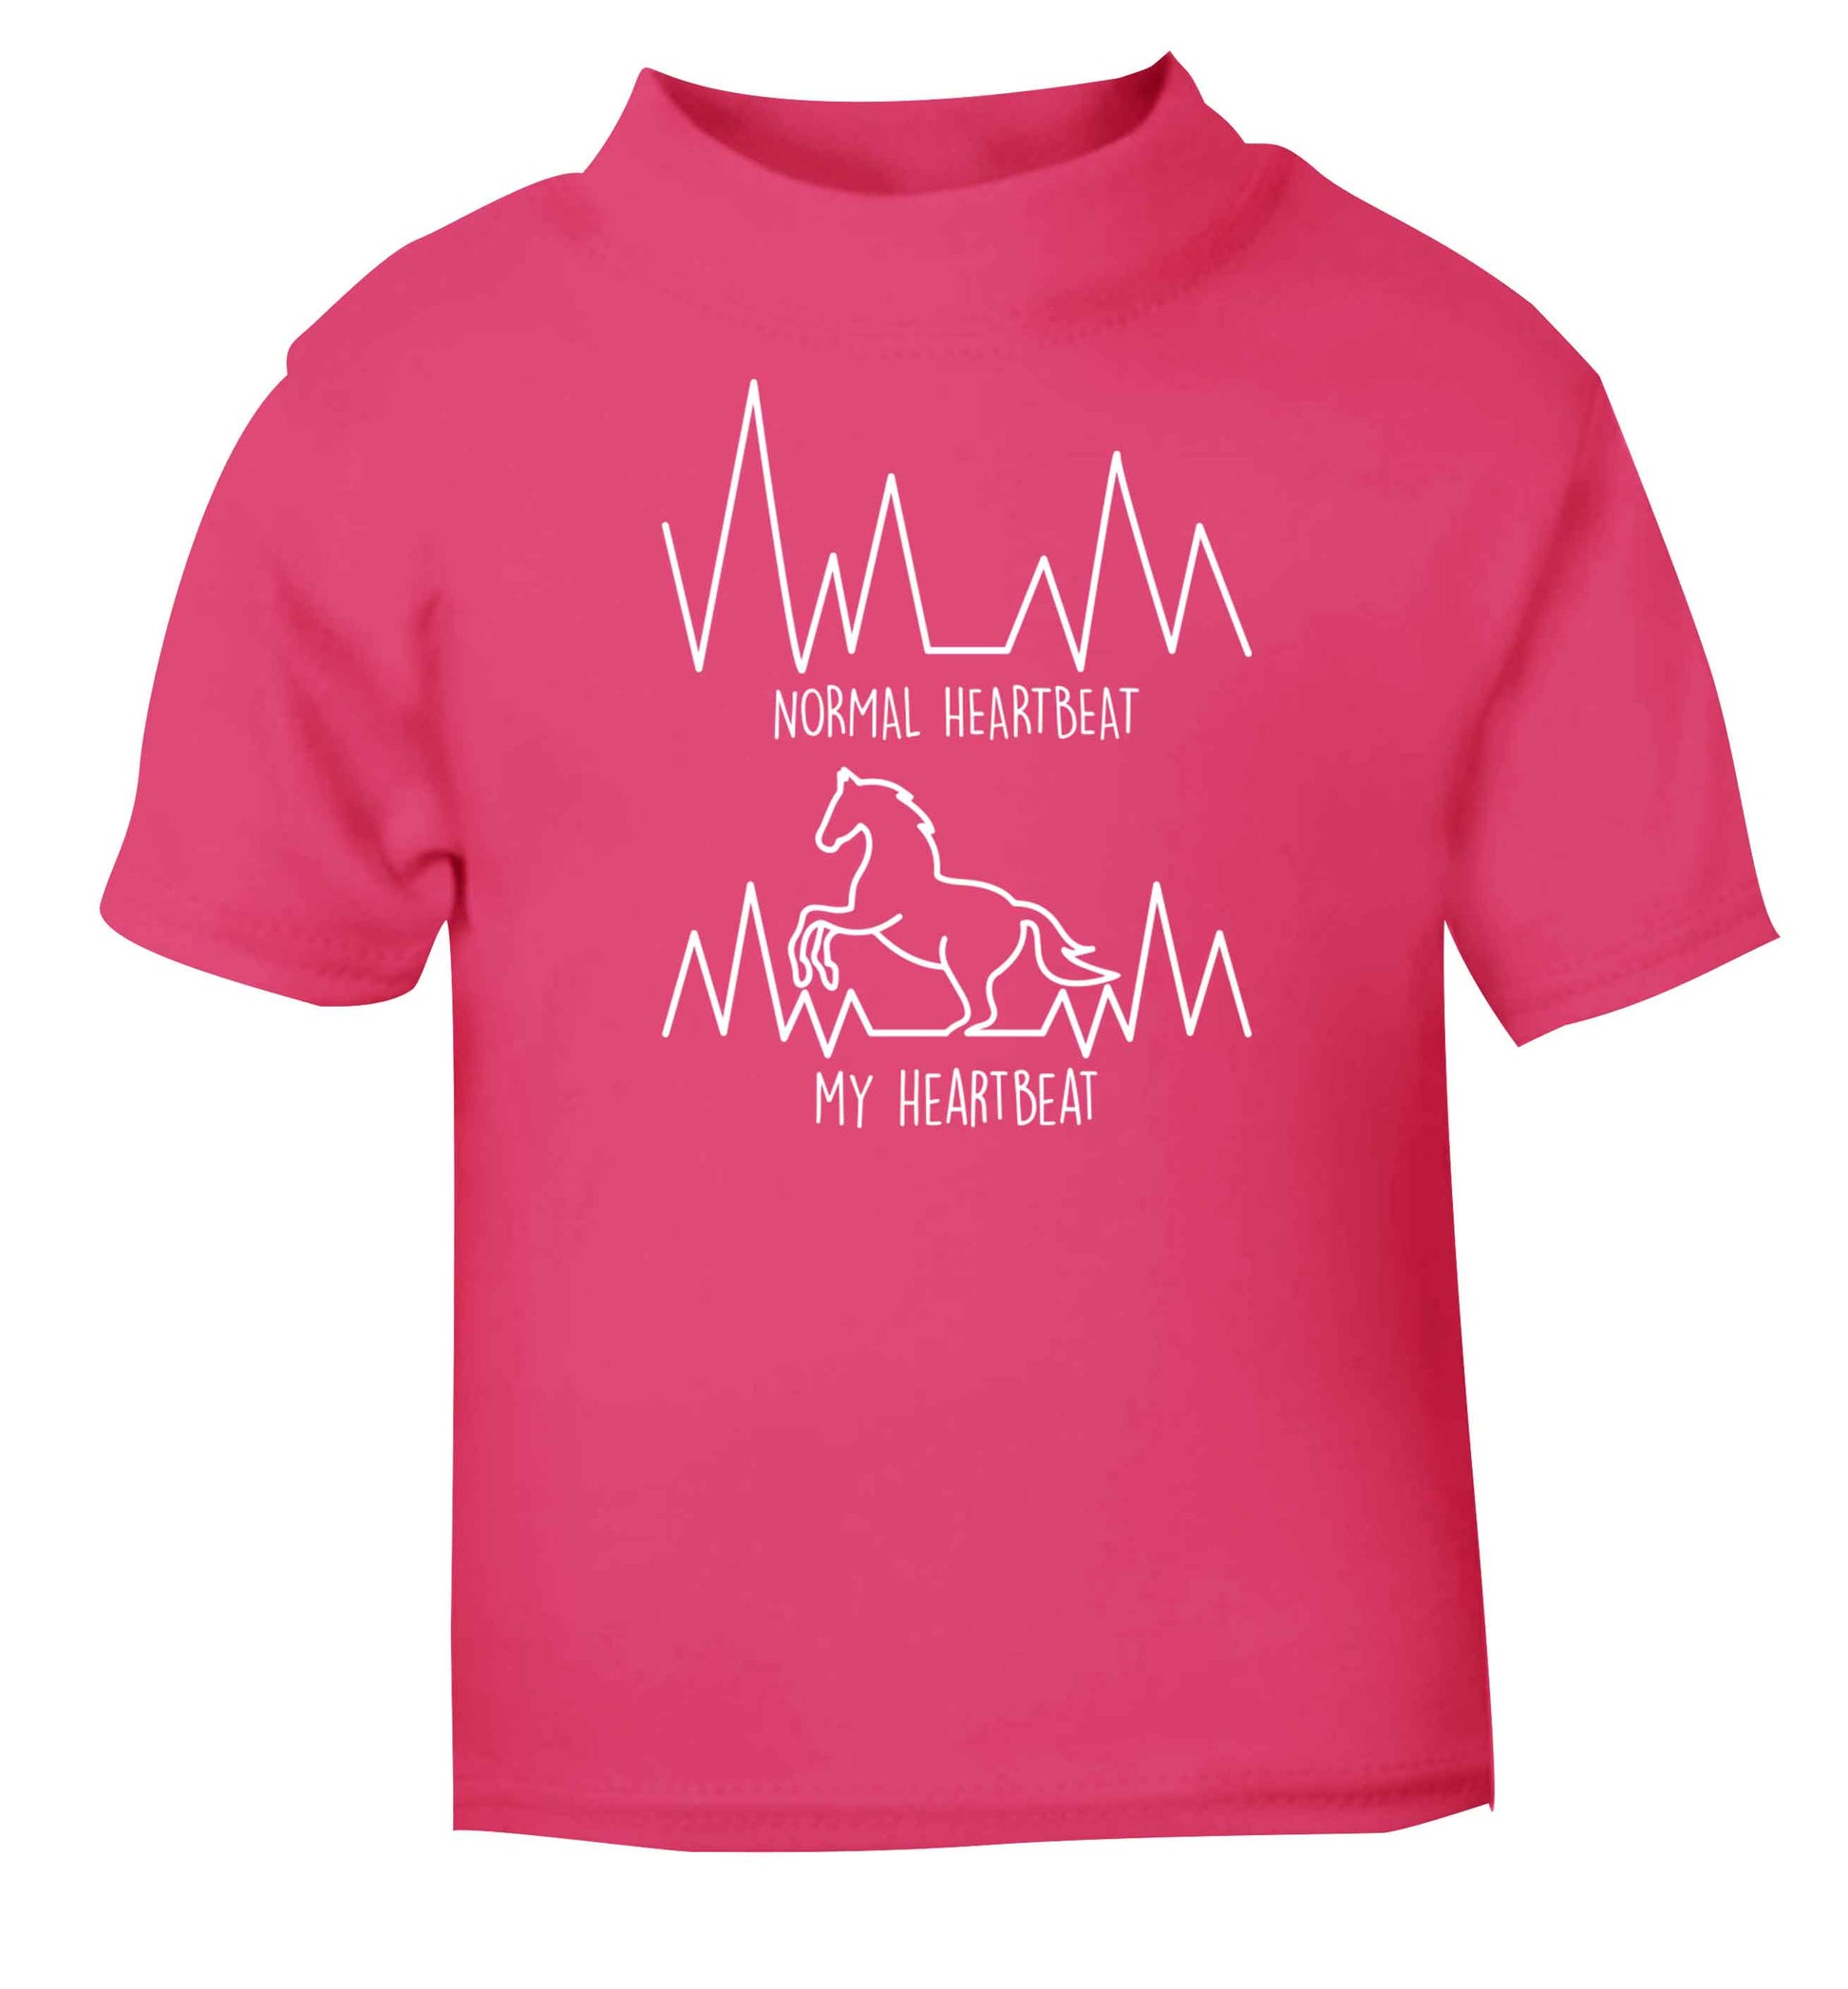 Horse - Normal heartbeat my heartbeat pink baby toddler Tshirt 2 Years